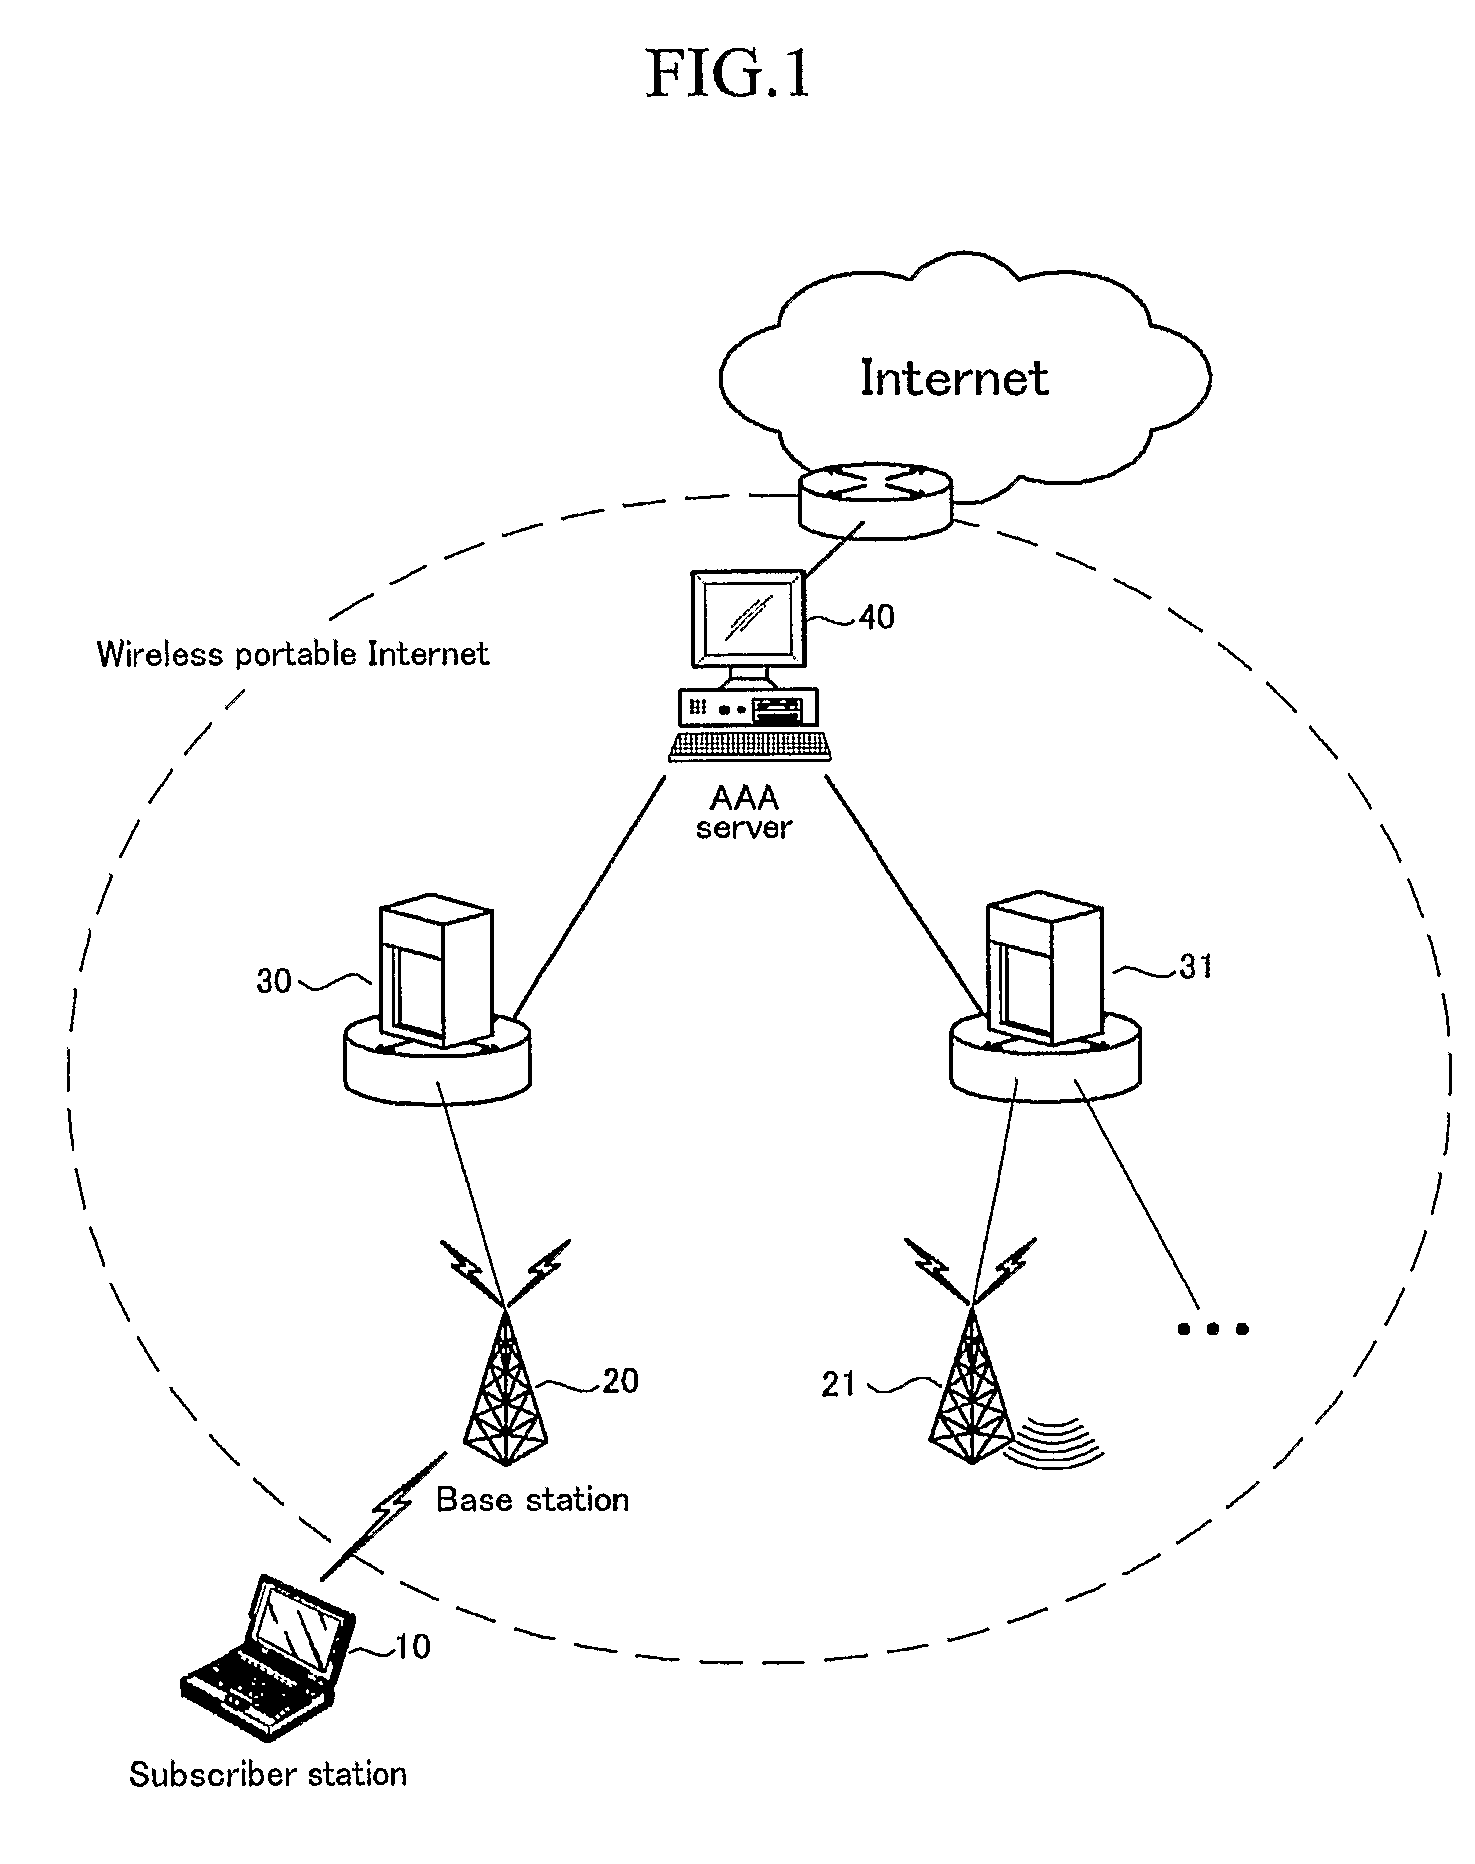 Method for Security Association Negotiation with Extensible Authentication Protocol in Wireless Portable Internet System